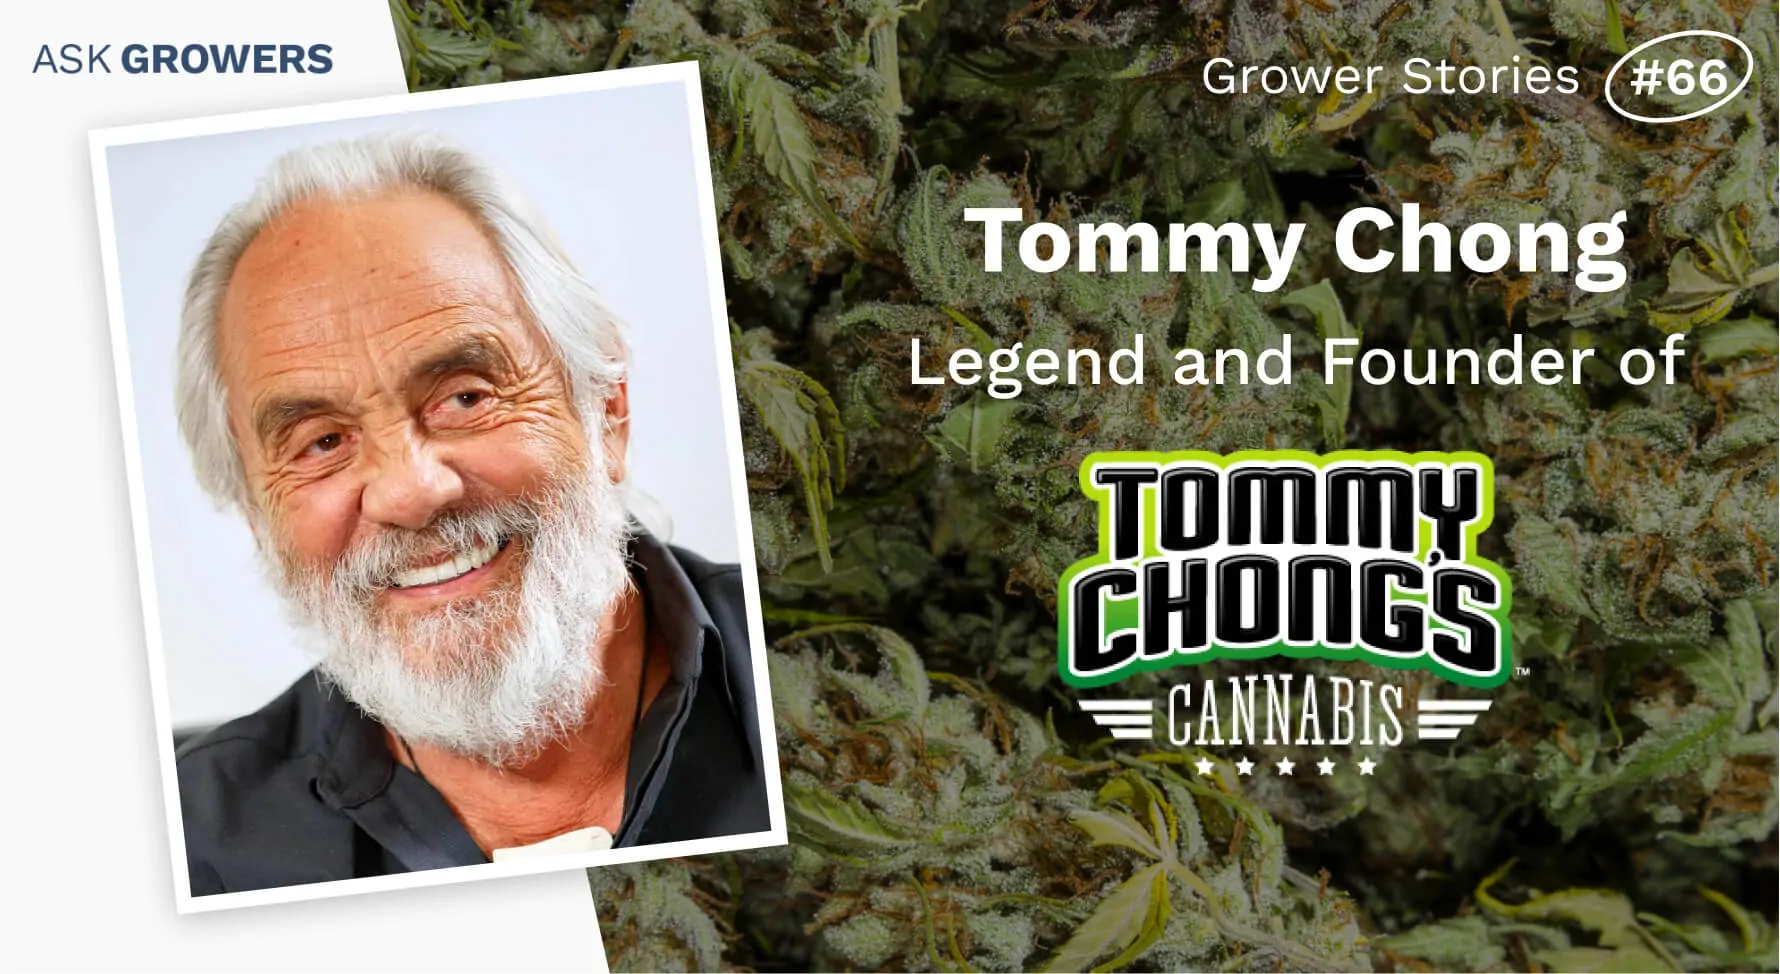 Grower Stories #66: Tommy Chong